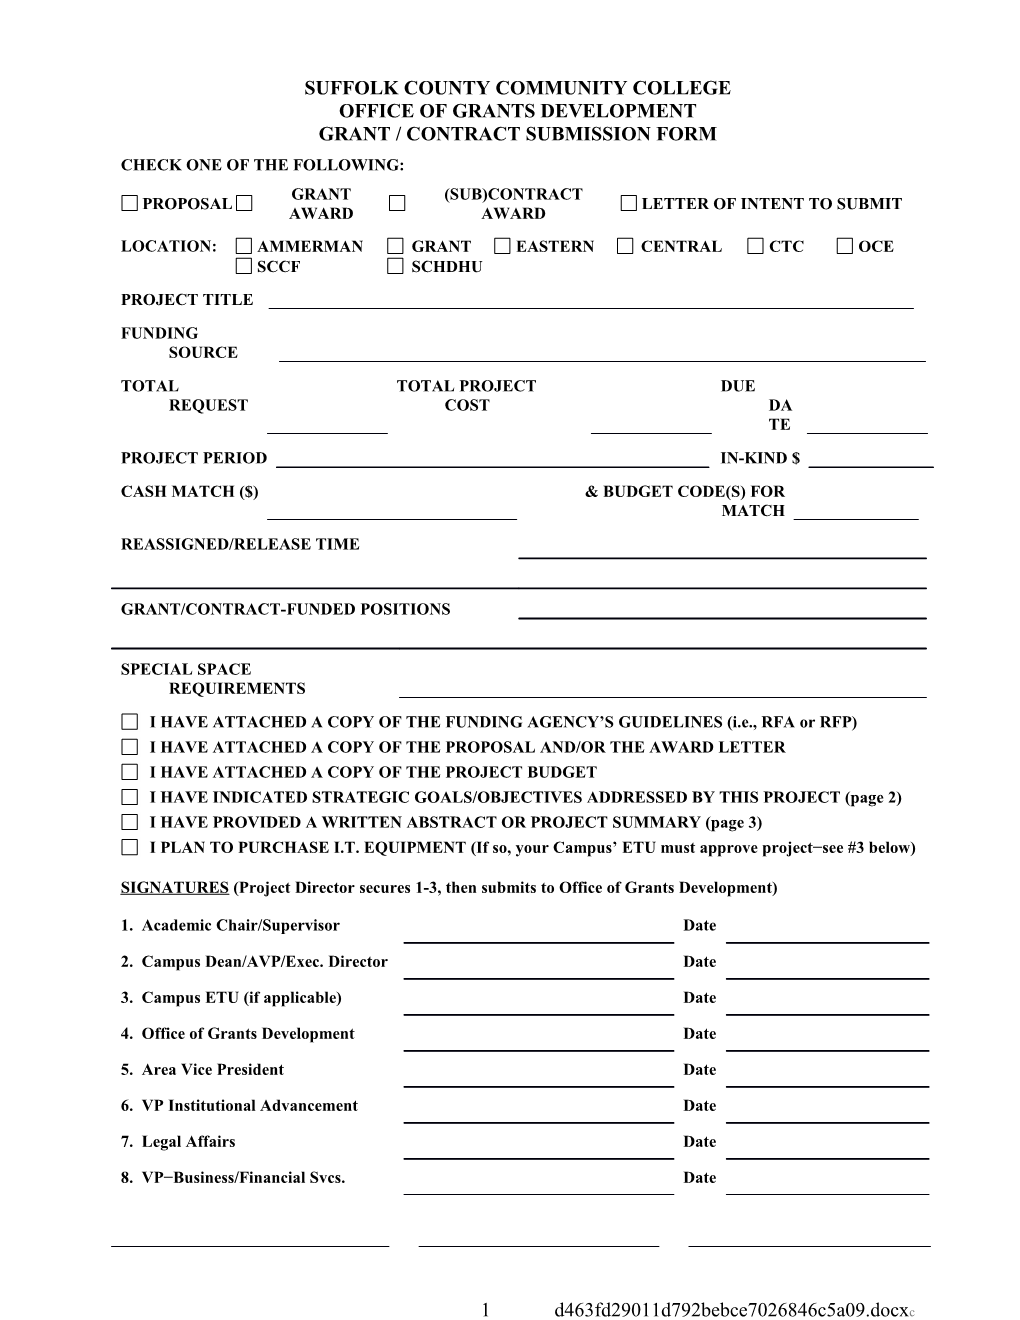 Grant/Contract Submission Form